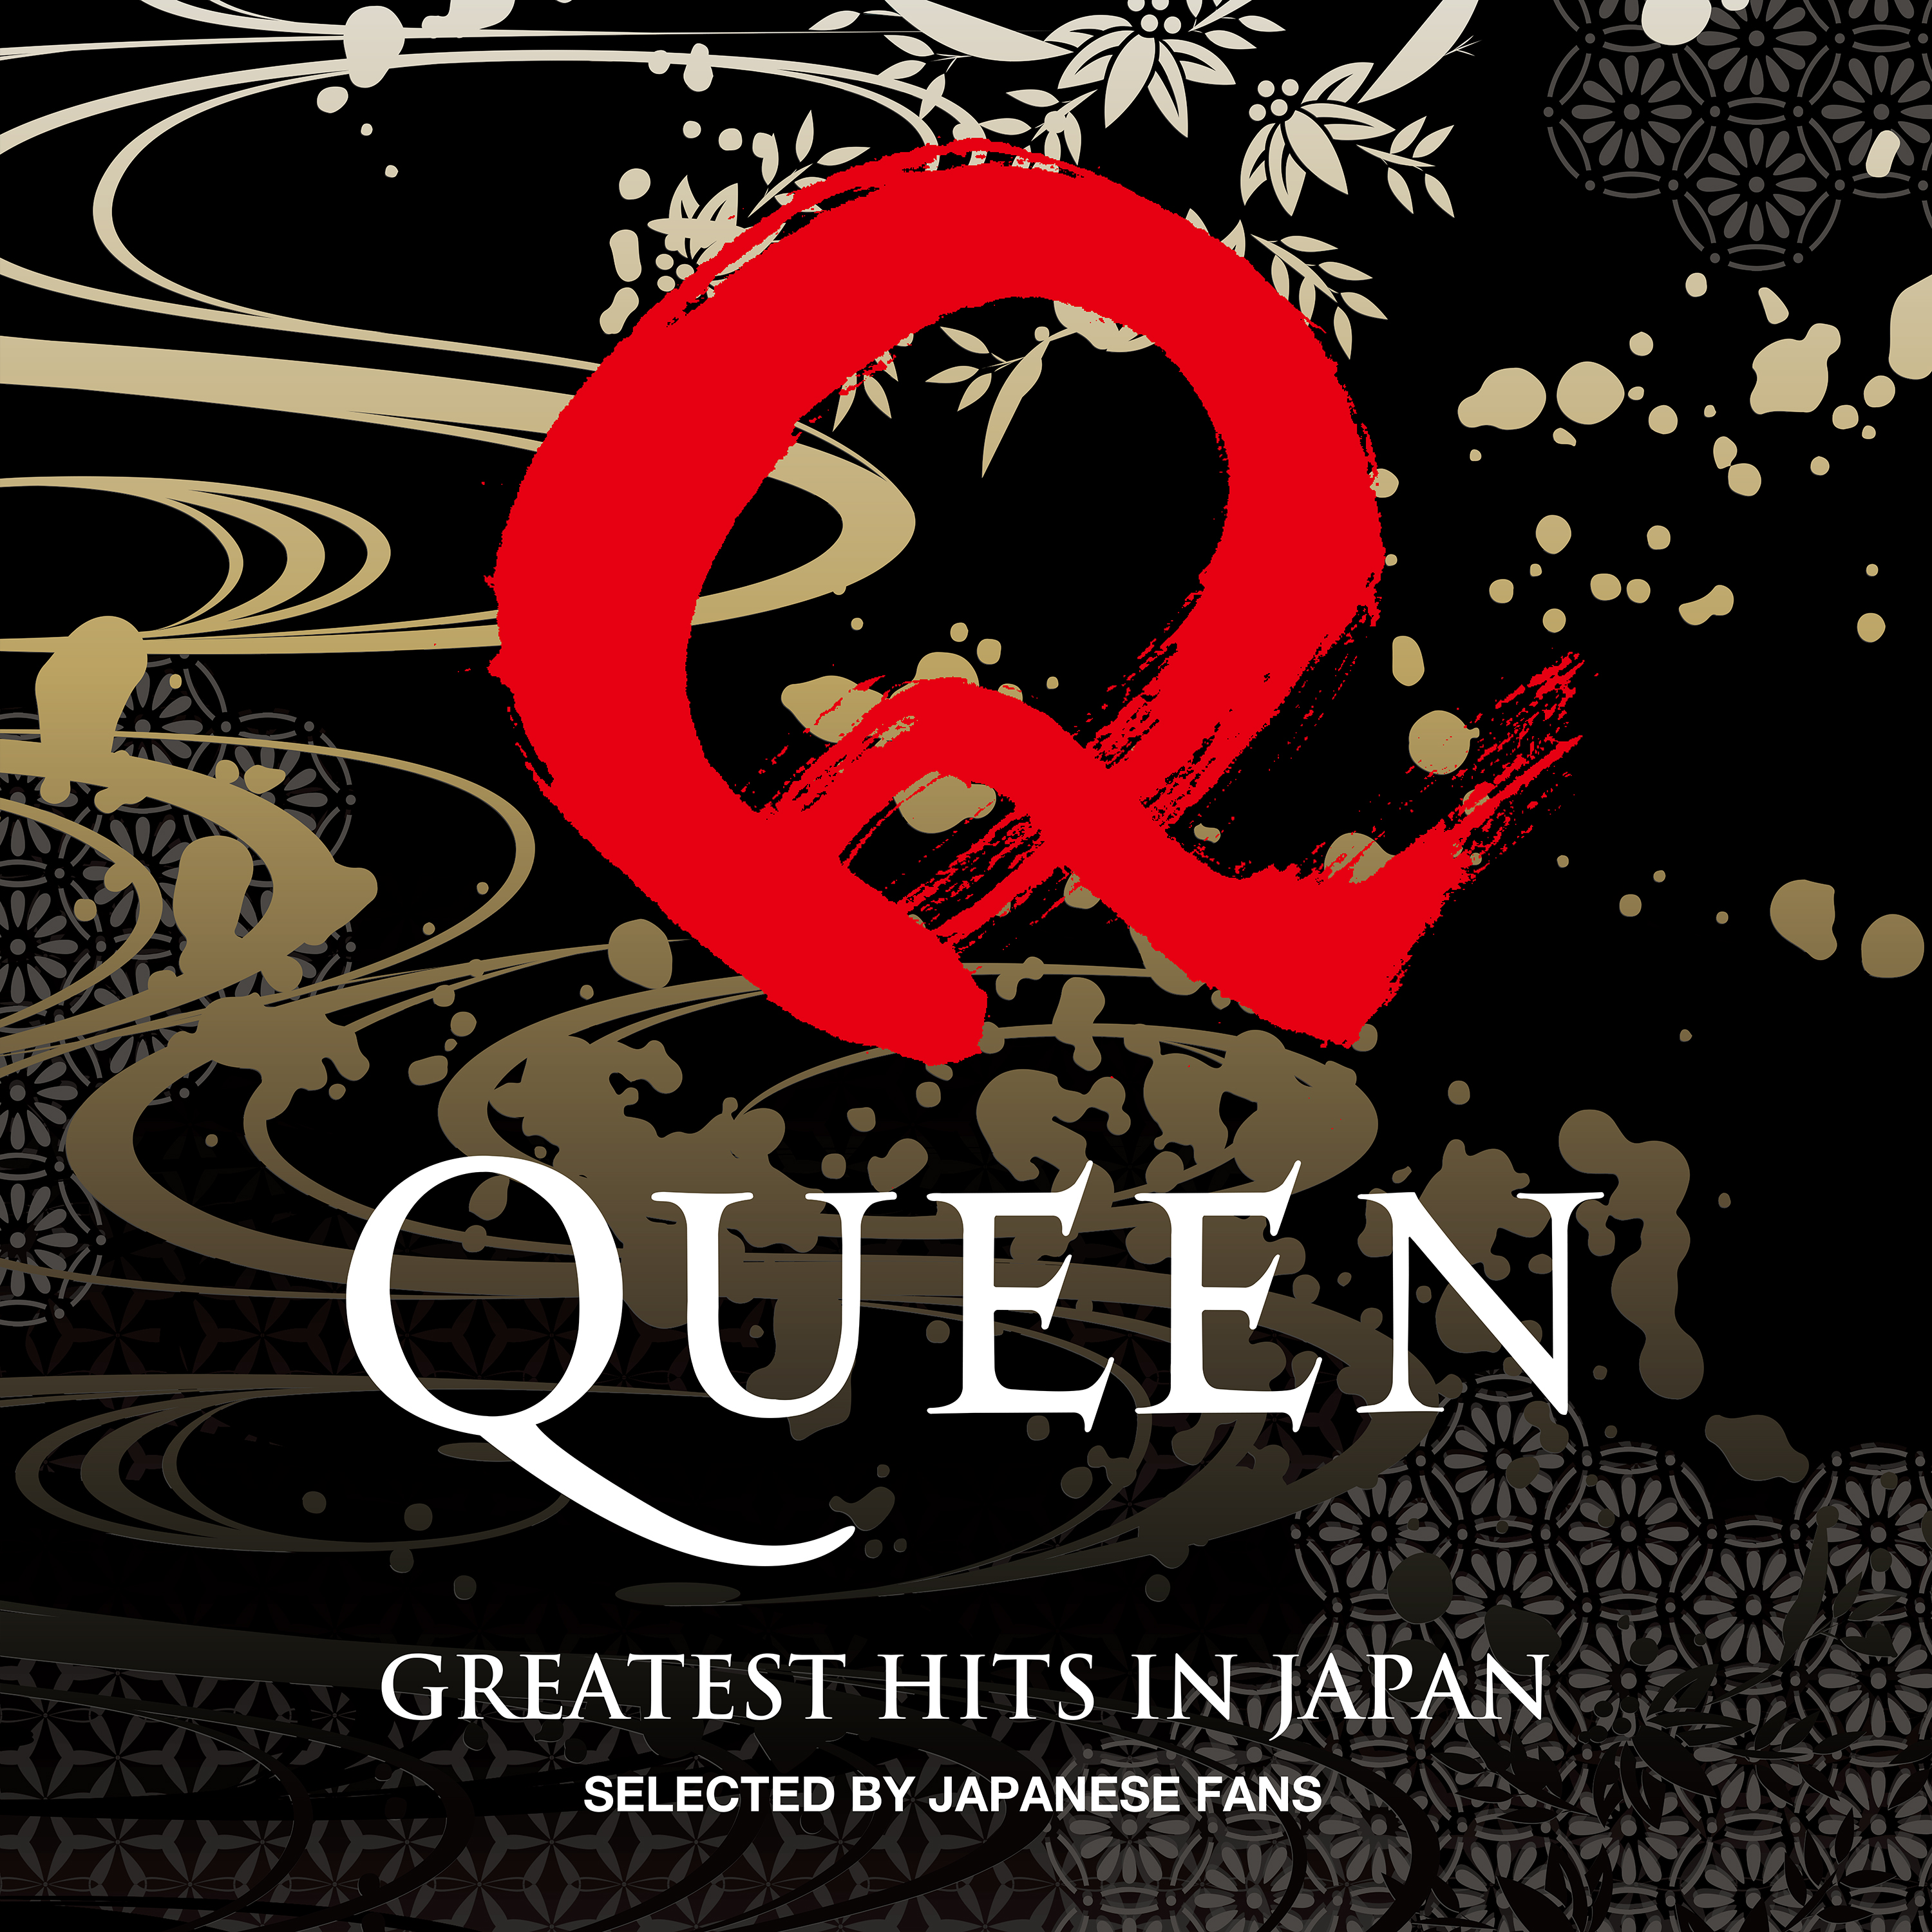 jord Overtræder Downtown Queen on Twitter: "Queen 'Greatest Hits in Japan'! A Special Fan-Voted  Album due for release 15th January 2020! Featuring 12 Top-Voted Classic Queen  Songs, as selected by Japanese Fans To Mark Their